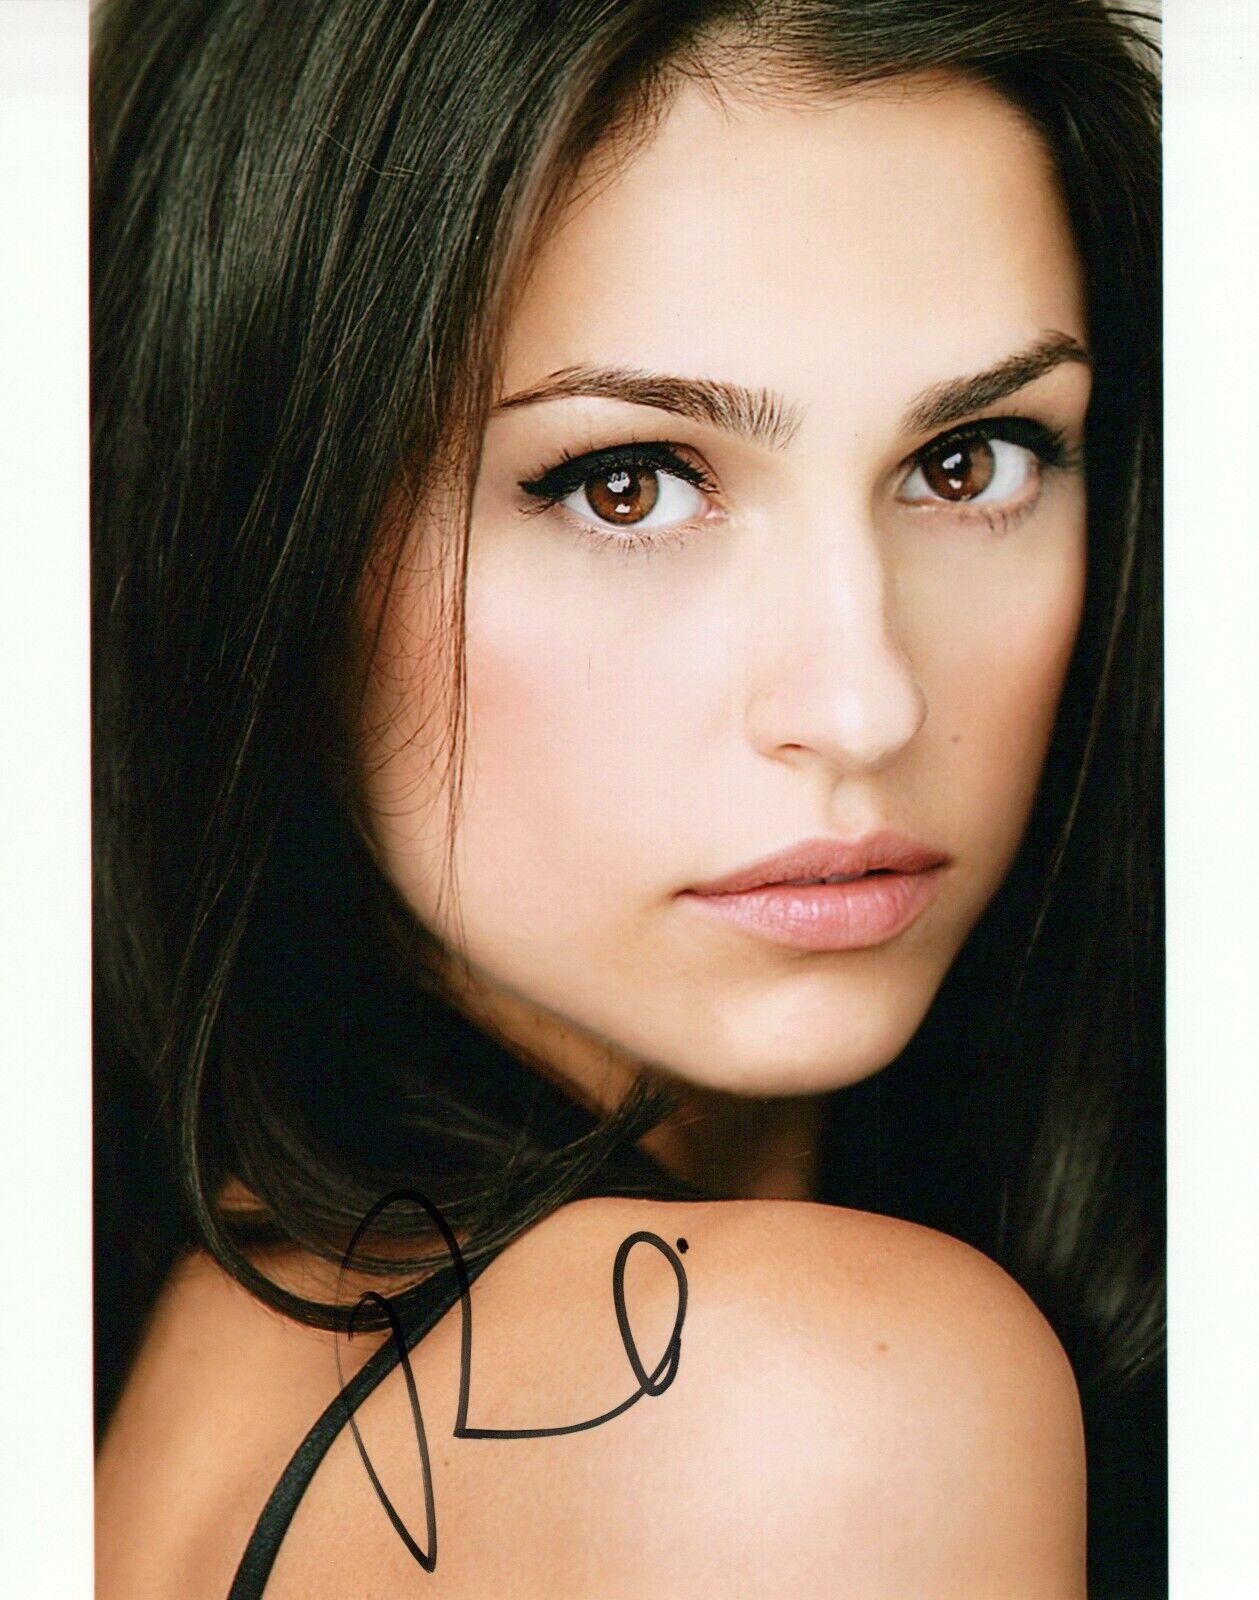 Raquel Alessi head shot autographed Photo Poster painting signed 8x10 #1